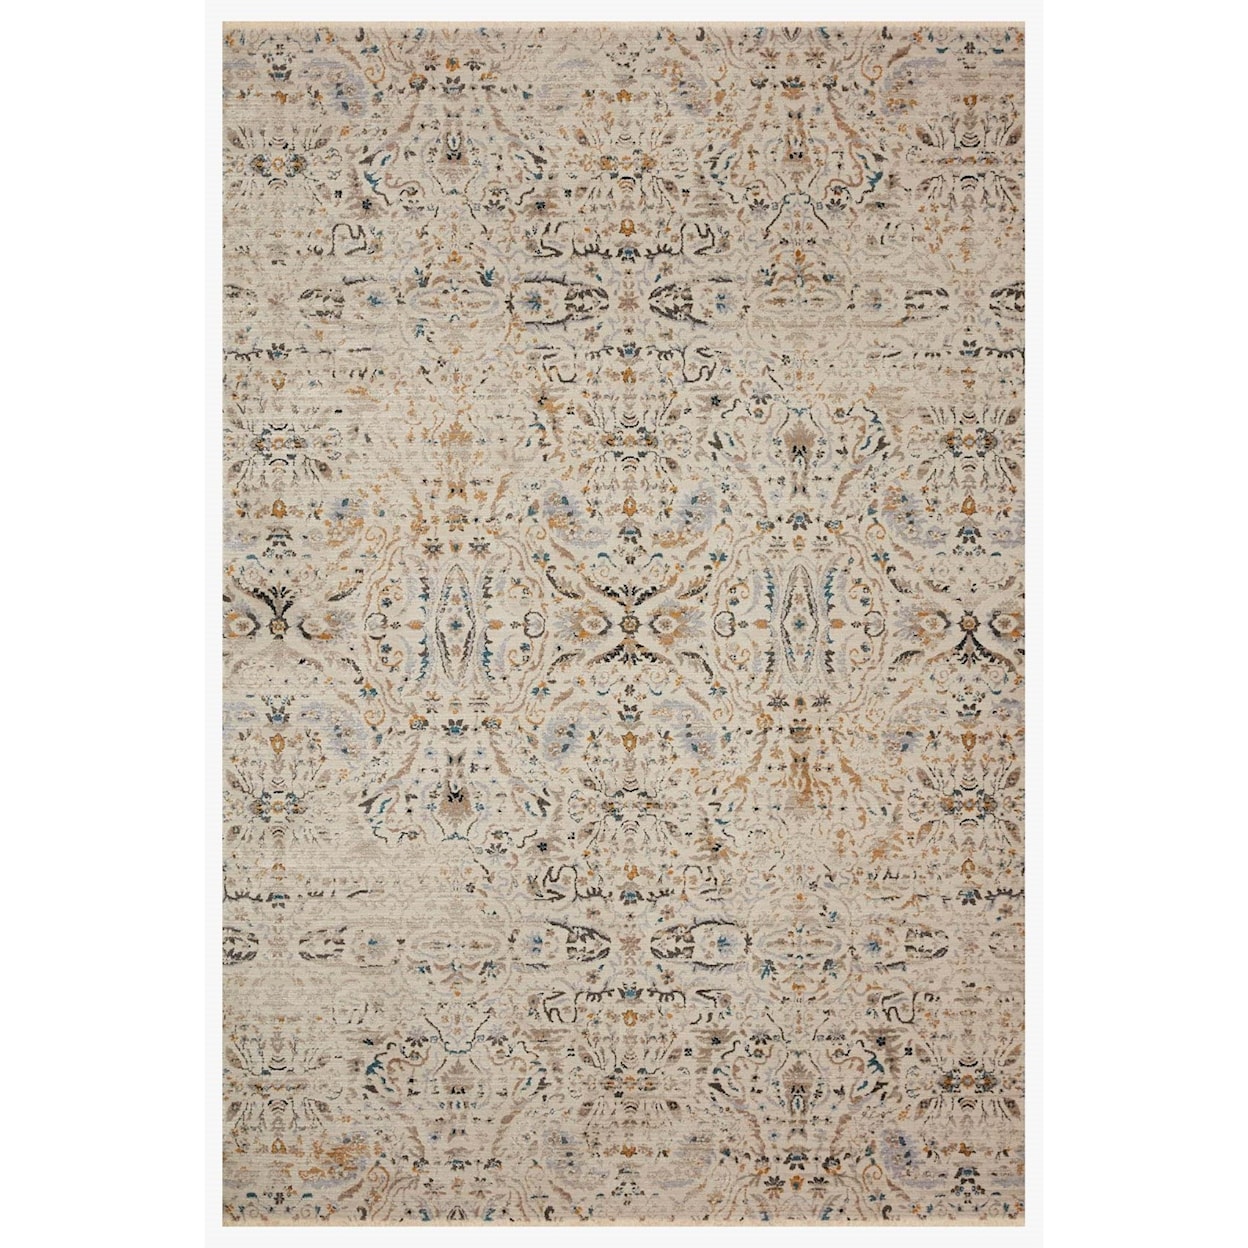 Reeds Rugs Leigh 5'3" x 7'6" Ivory / Straw Rug